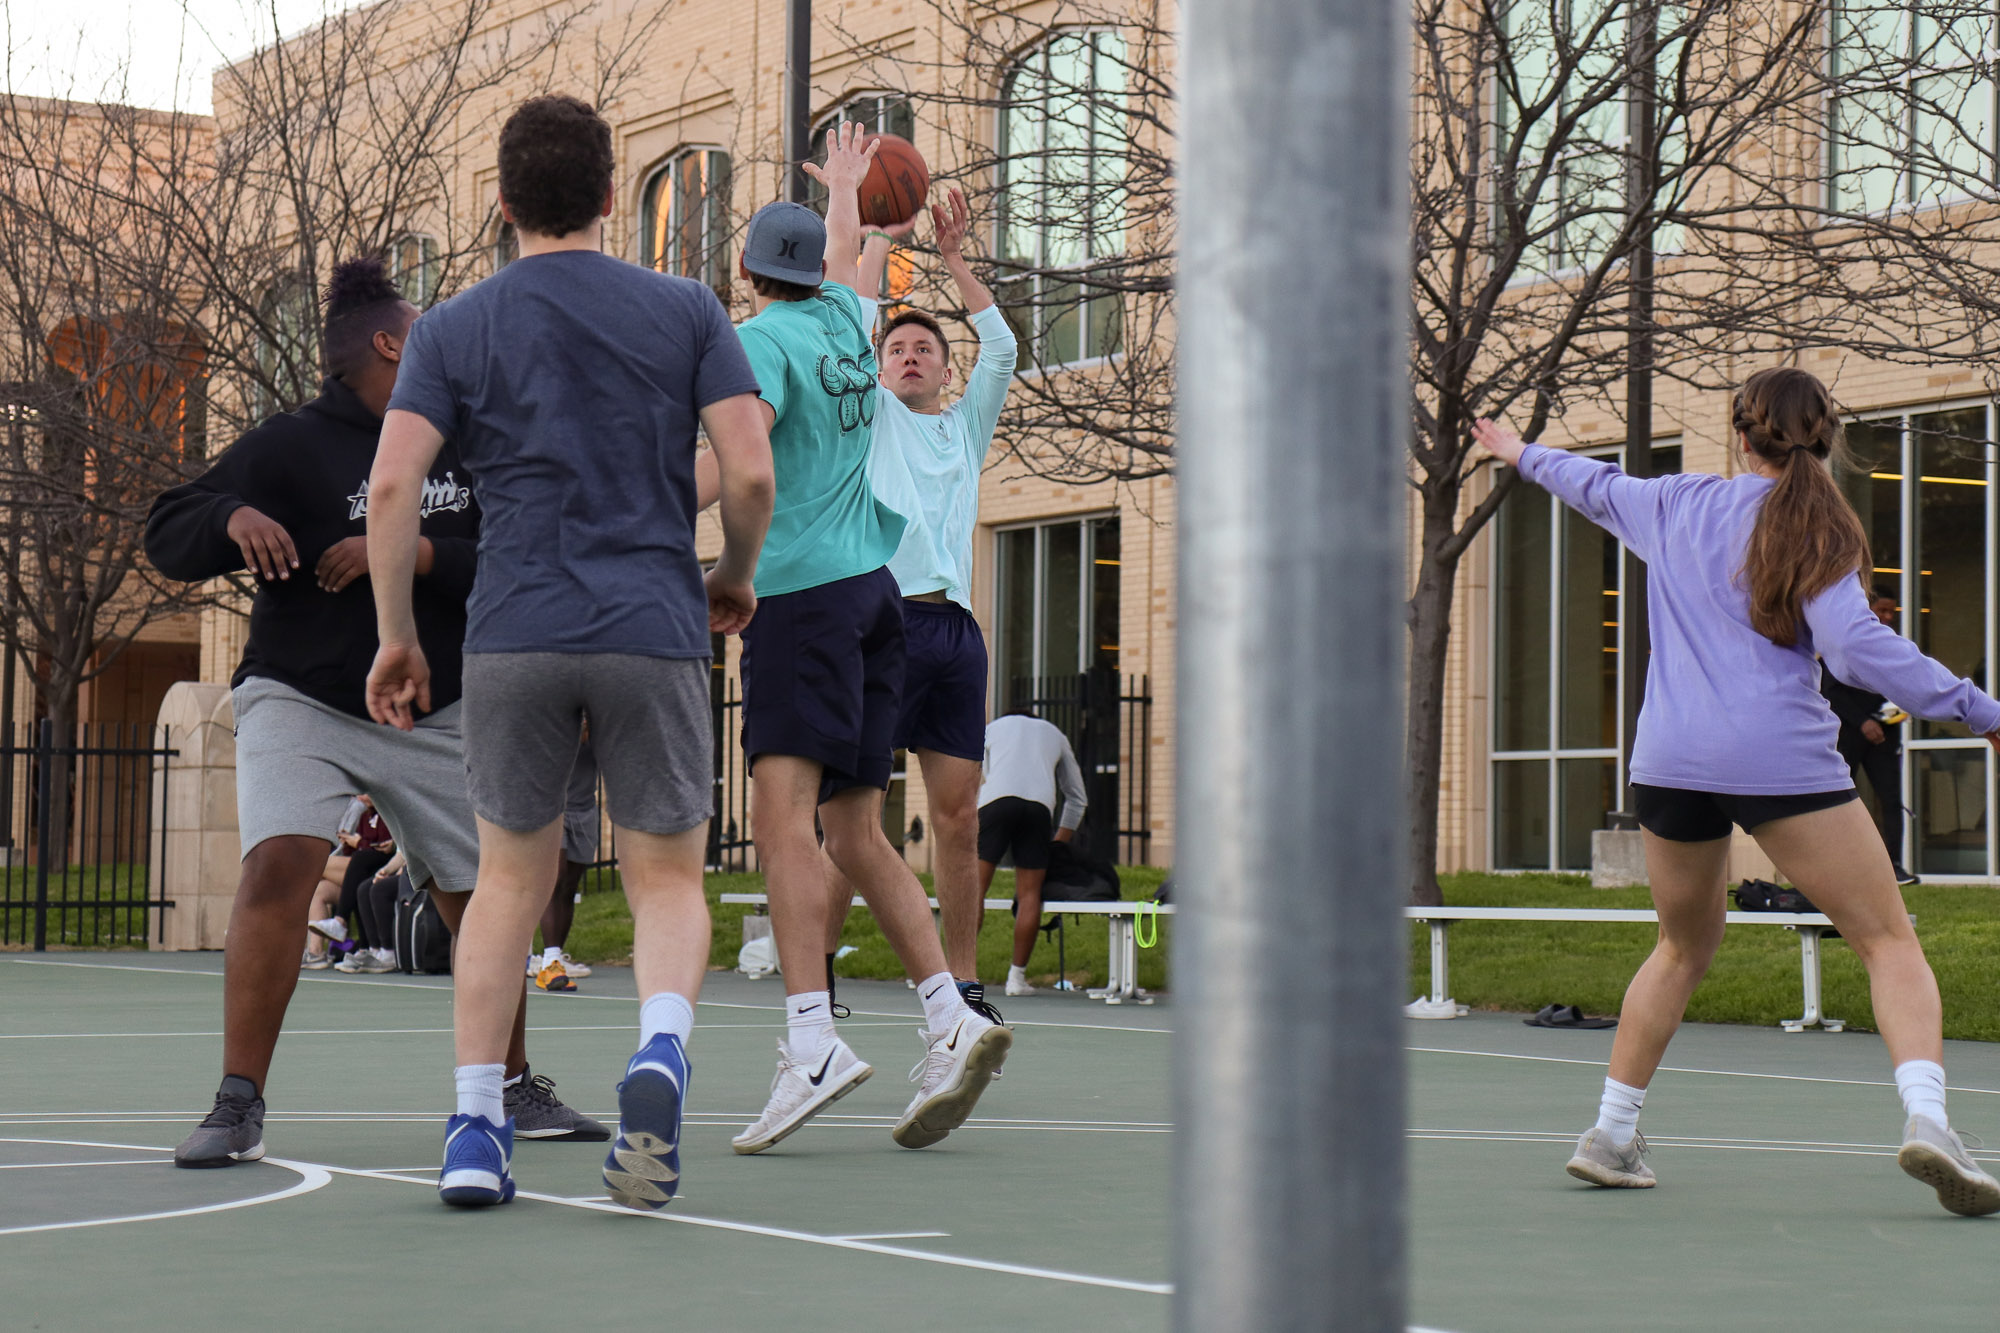 Outdoor SRWC basketball courts reopen with low virus numbers on campus -  Optimist